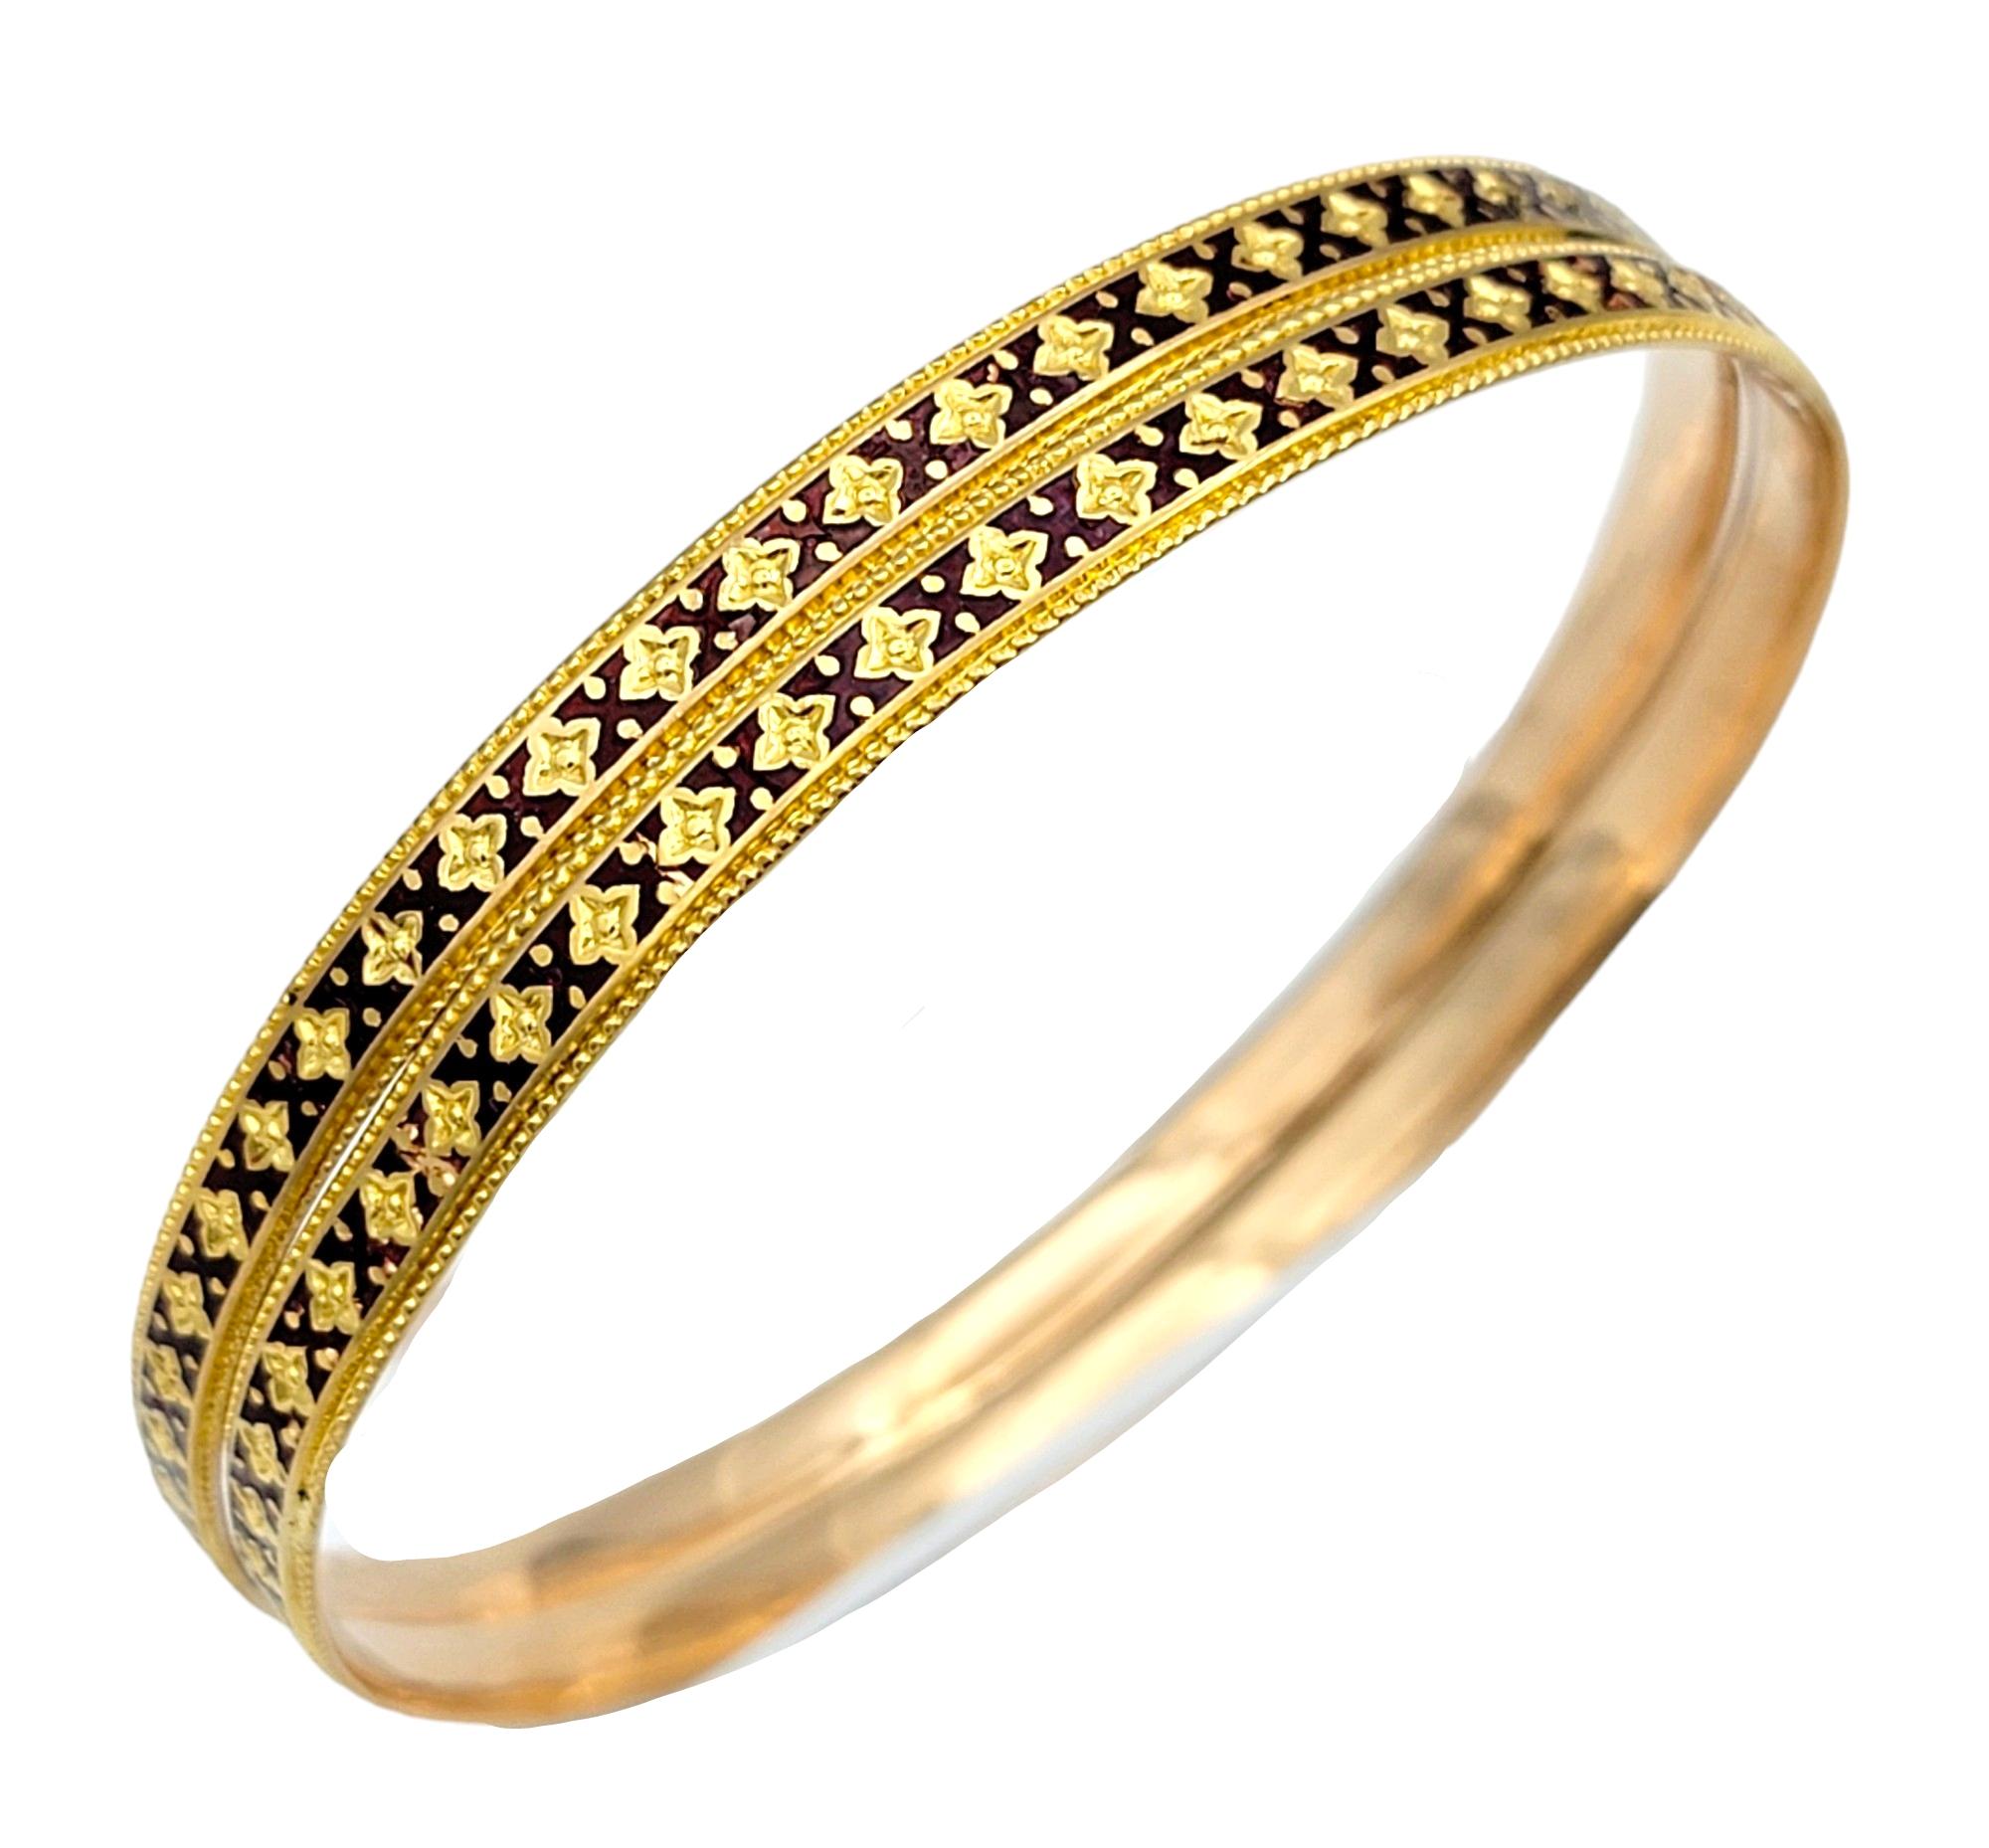 Introducing a stunning set of 2 stacking bangle bracelets, crafted in luxurious 22 karat yellow gold, offering a timeless blend of elegance and versatility. Each bracelet features a delicate gold milgrain edging that adds a touch of refinement and